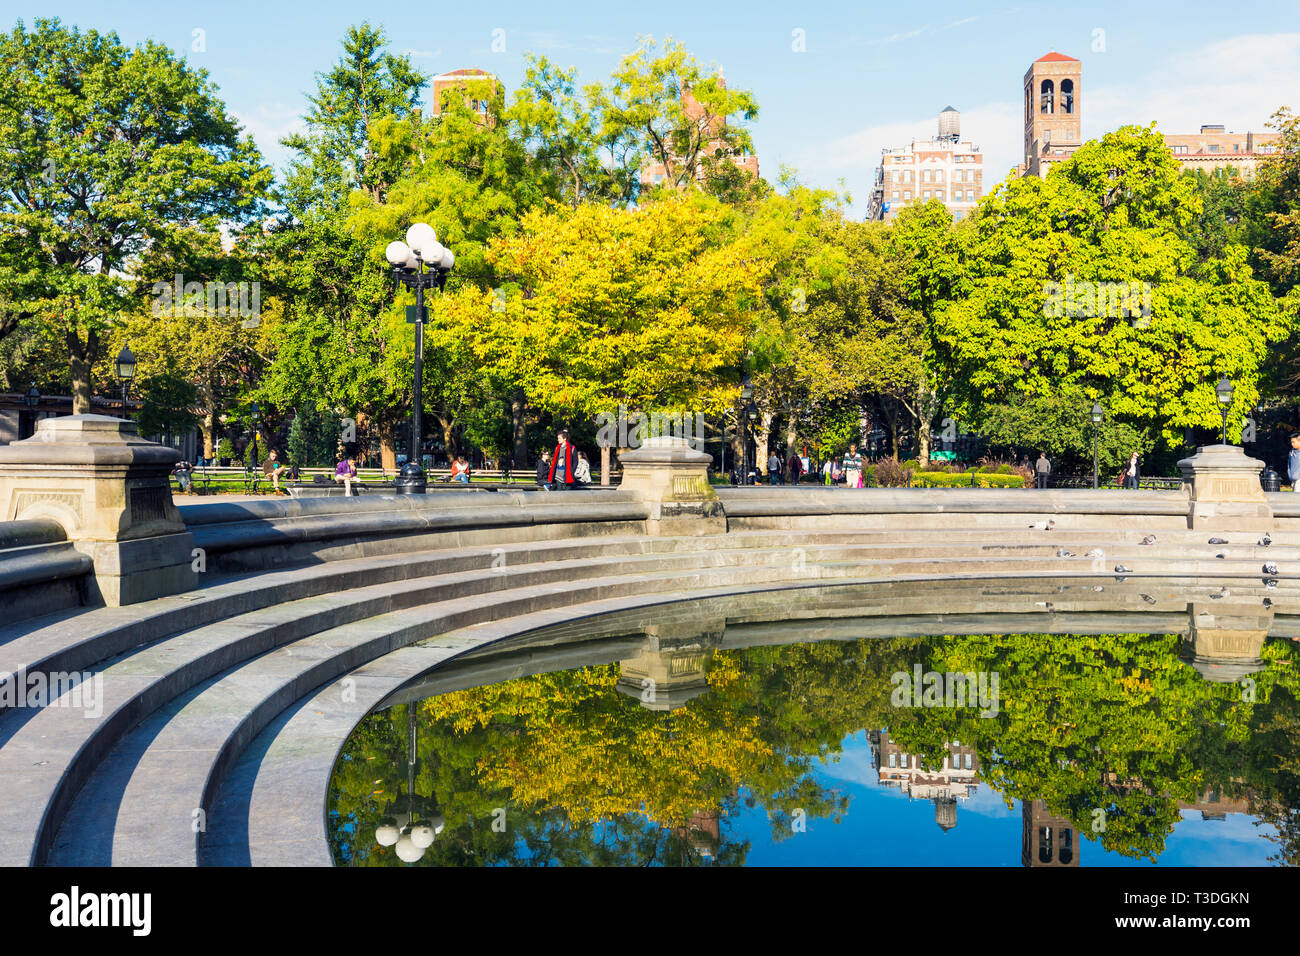 The central fountain pond in Washington Square Park, New York City, New York State, USA. Stock Photo